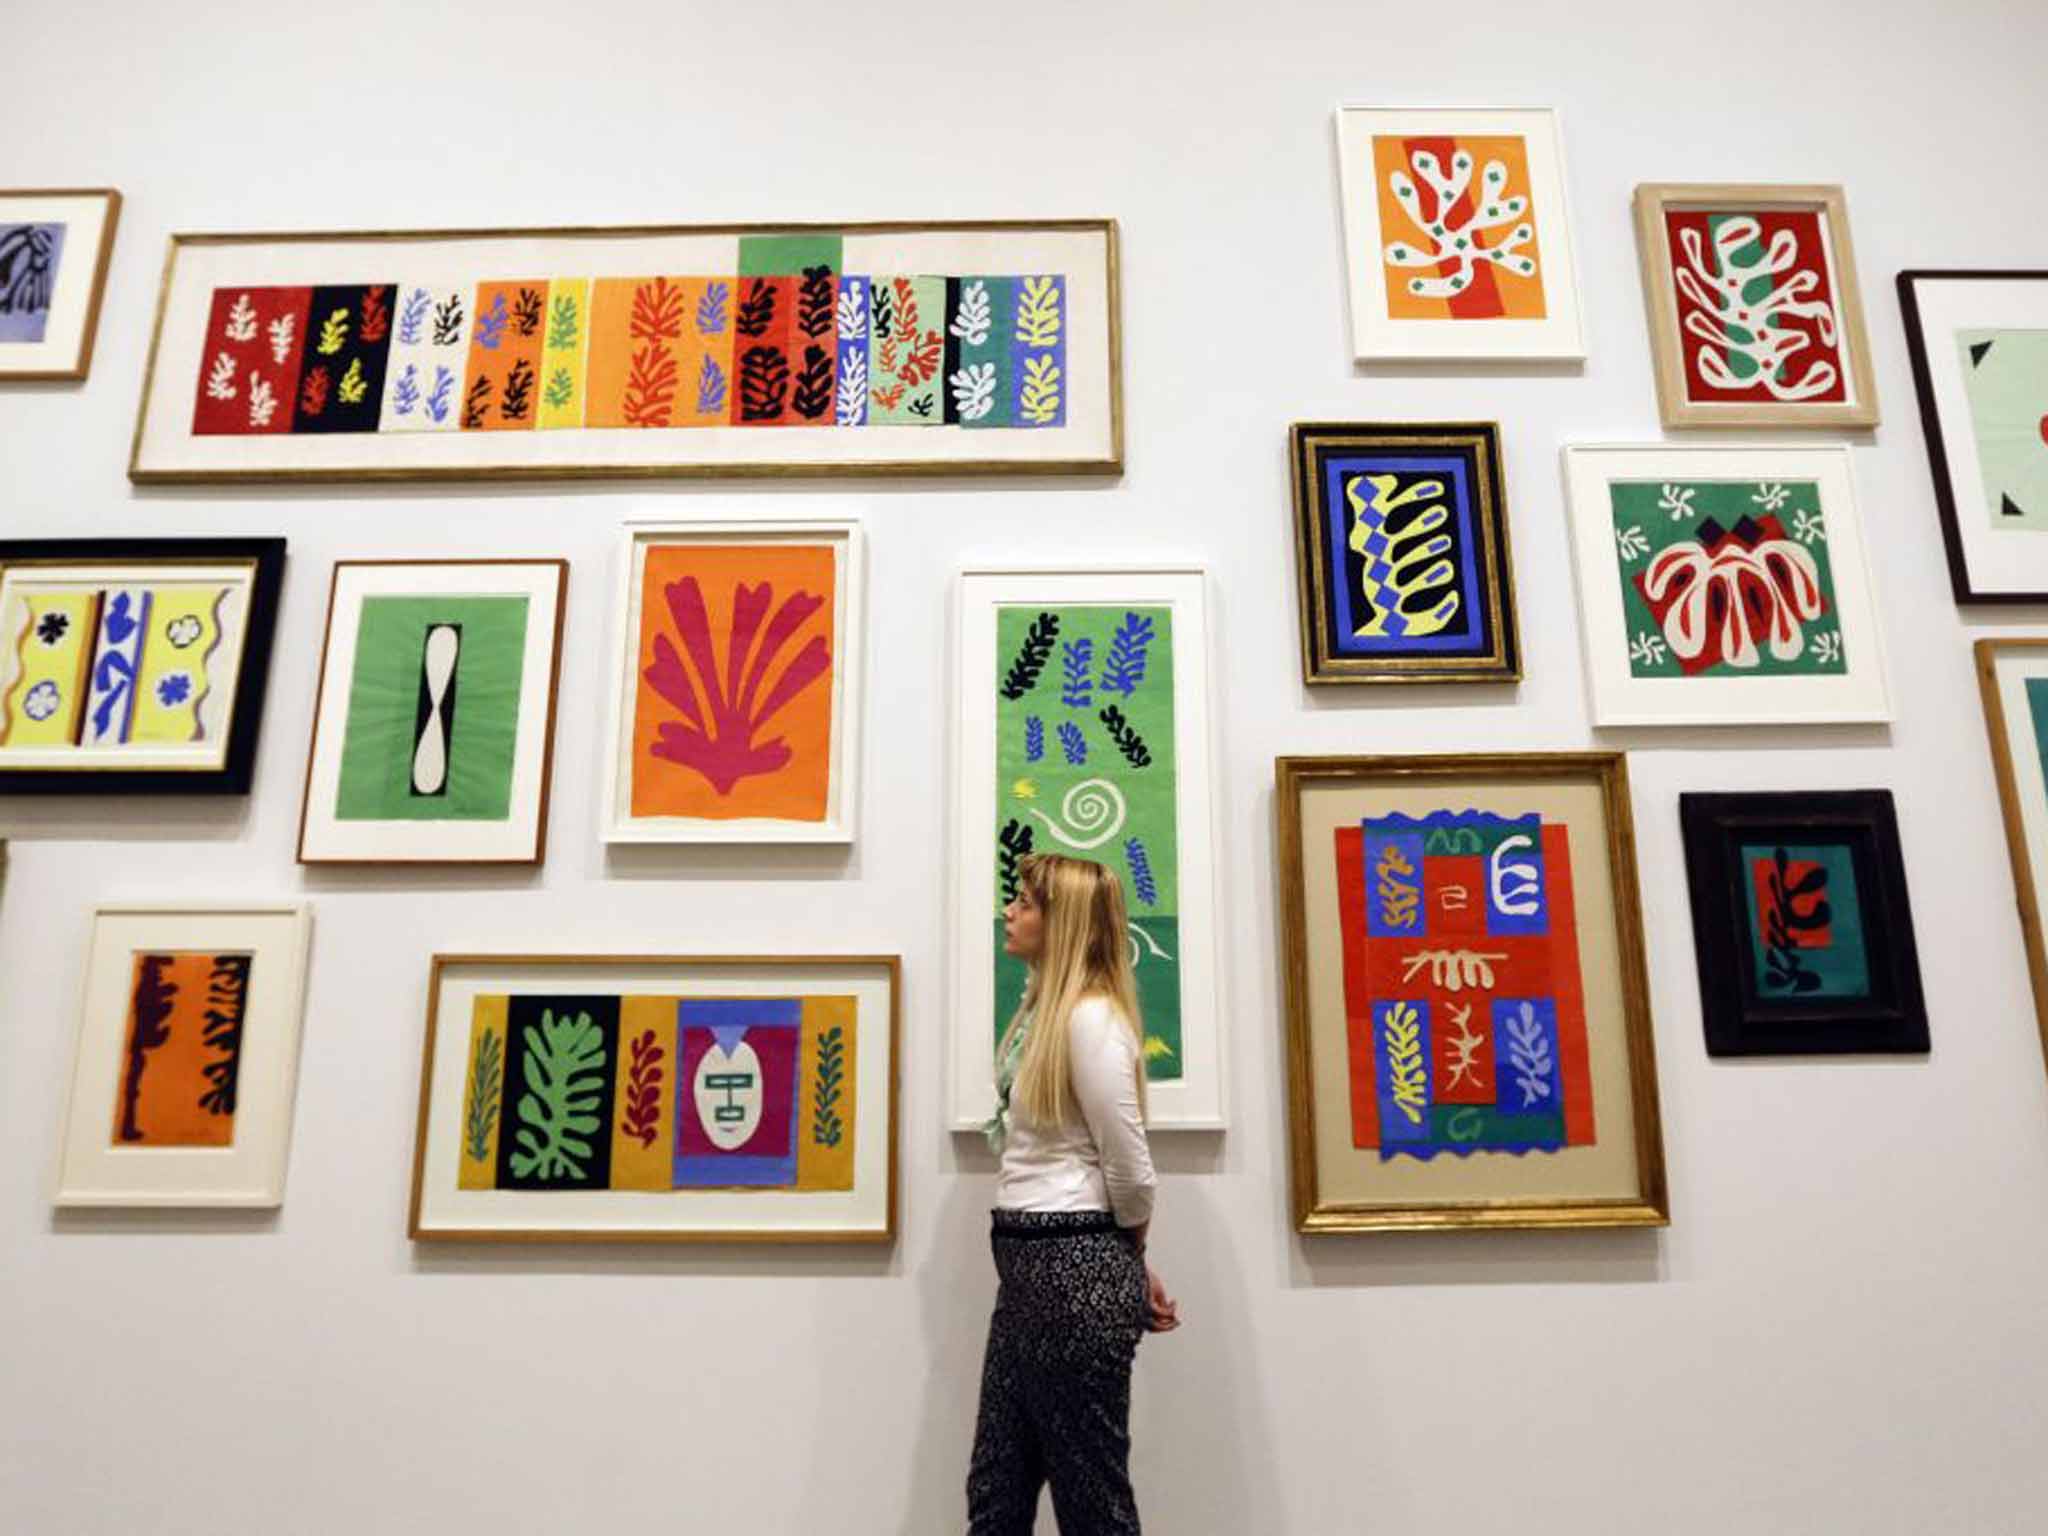 You've been framed: Henri Matisse's colourful cut-outs at Tate Modern